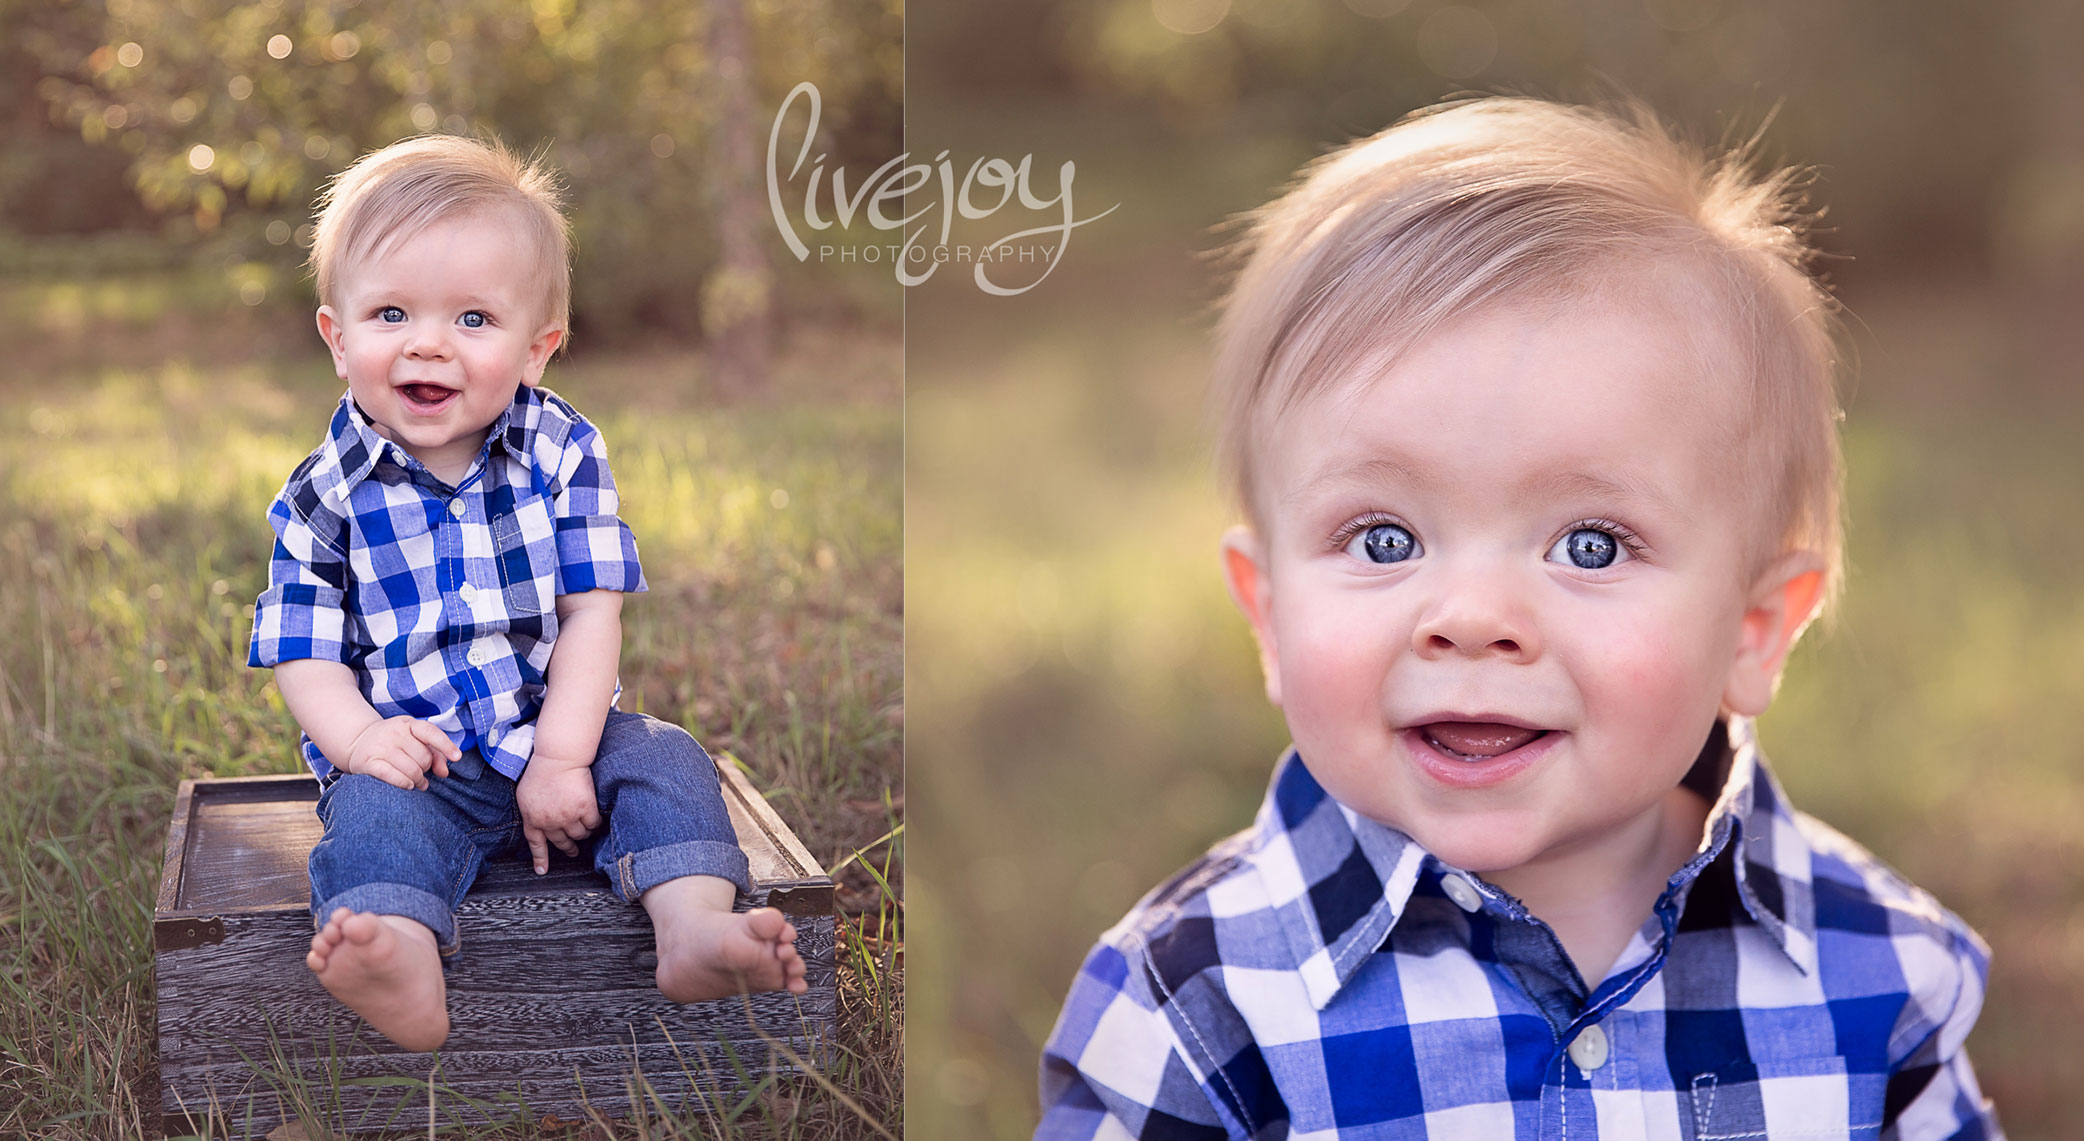 9 Months Baby Photography | Oregon | Livejoy Photography